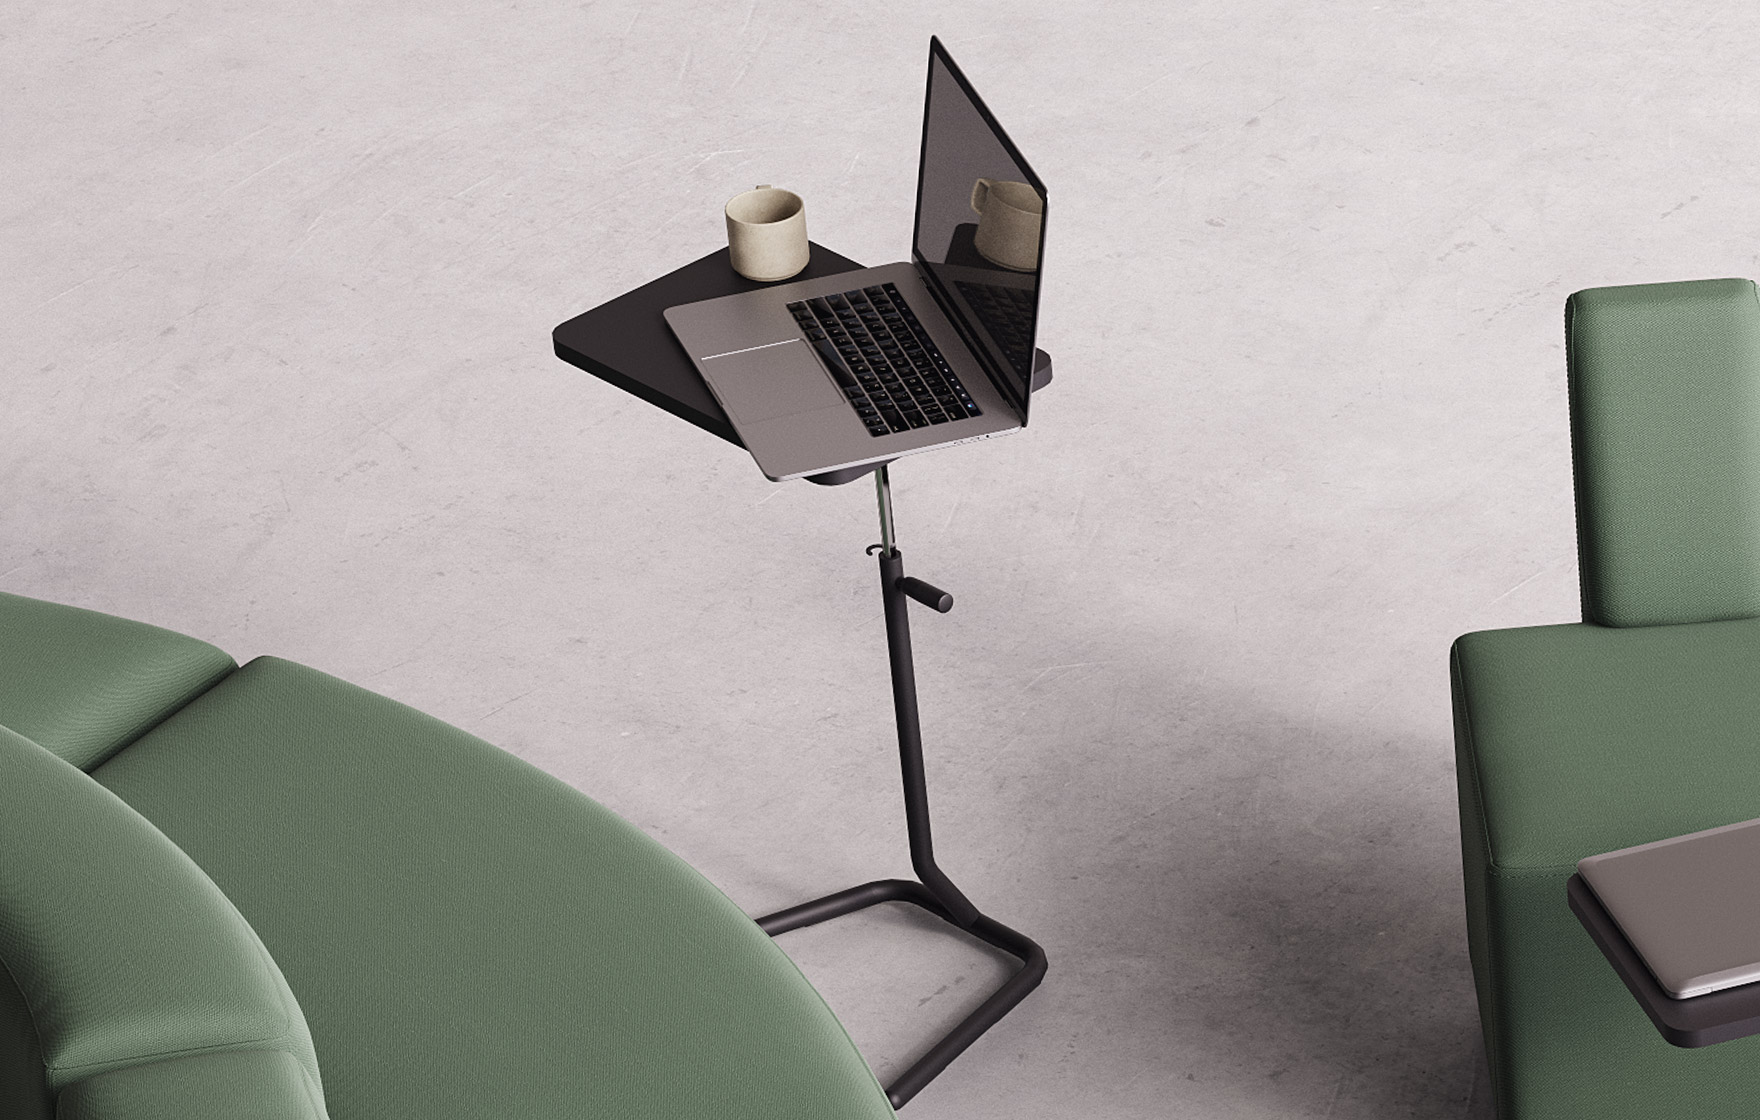 A laptop on an Y-table adjustable height work table next to a green couch.